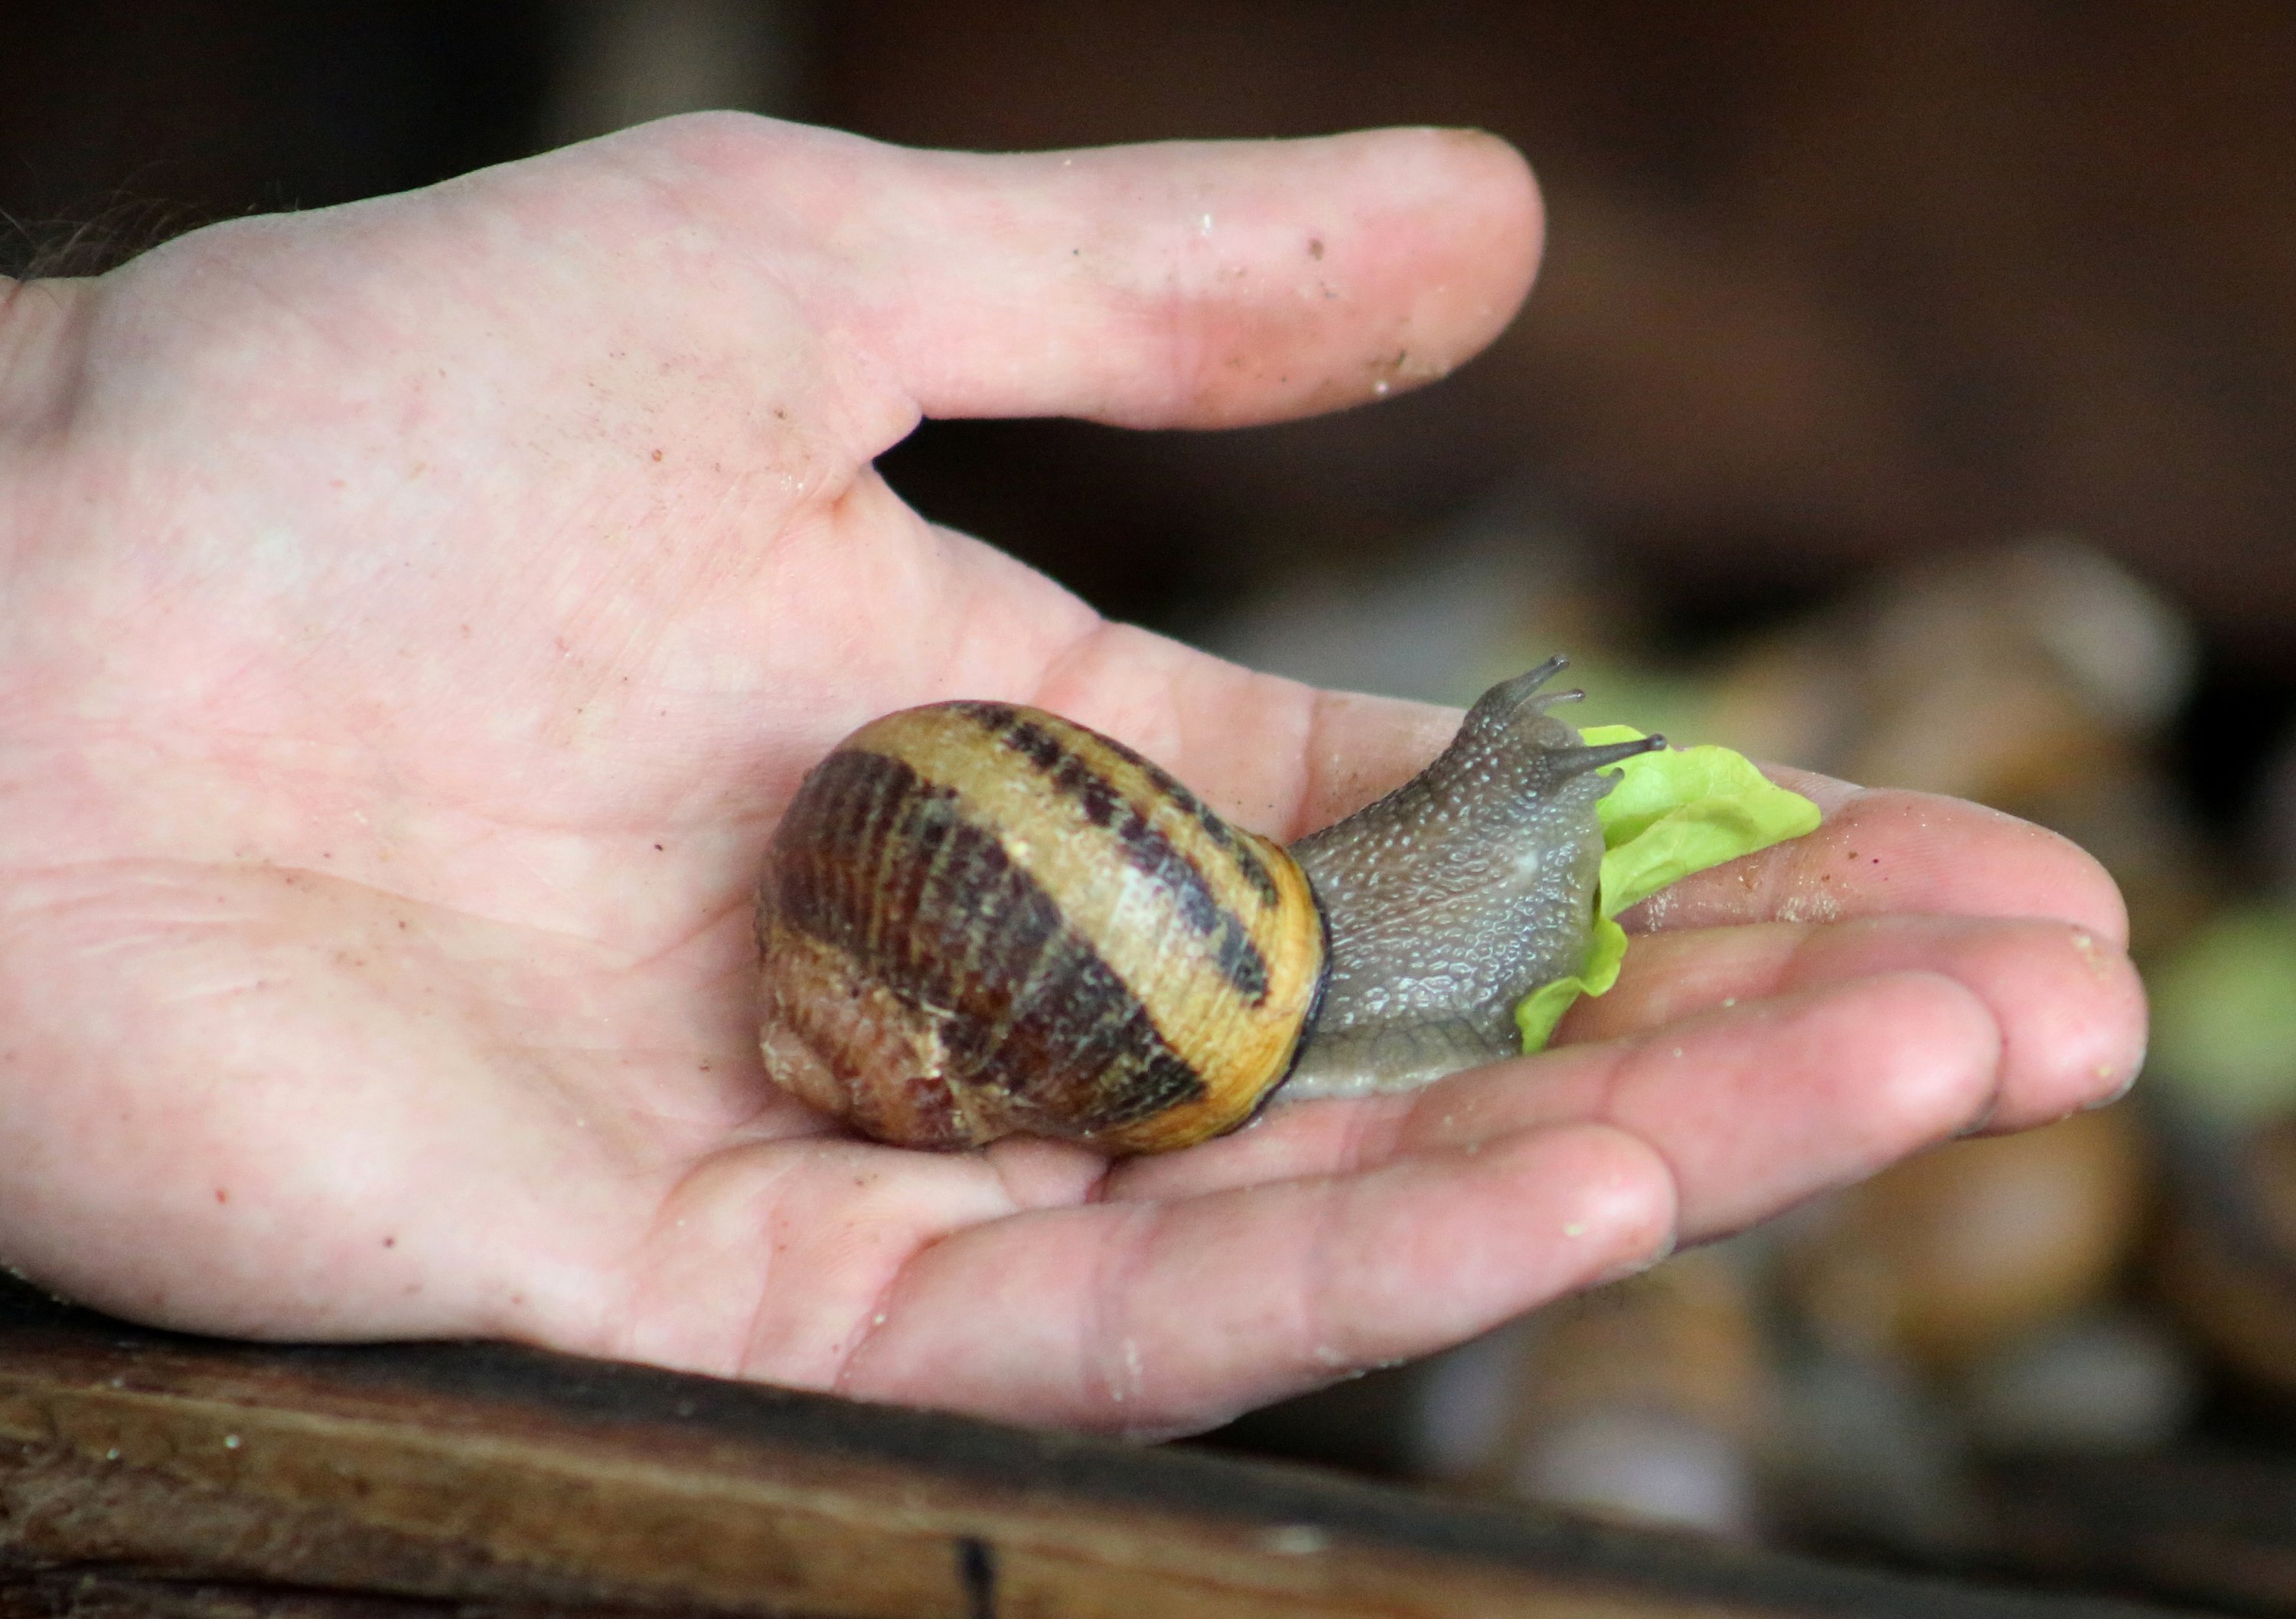 French snail grower and soap maker Damien Desrocher feeds a lettuce leaf to a snail before extracting slime that he uses to make soap bars in his snail enclosure in Wahagnies, near Lille, France, May 11, 2021. (Reuters Photo)